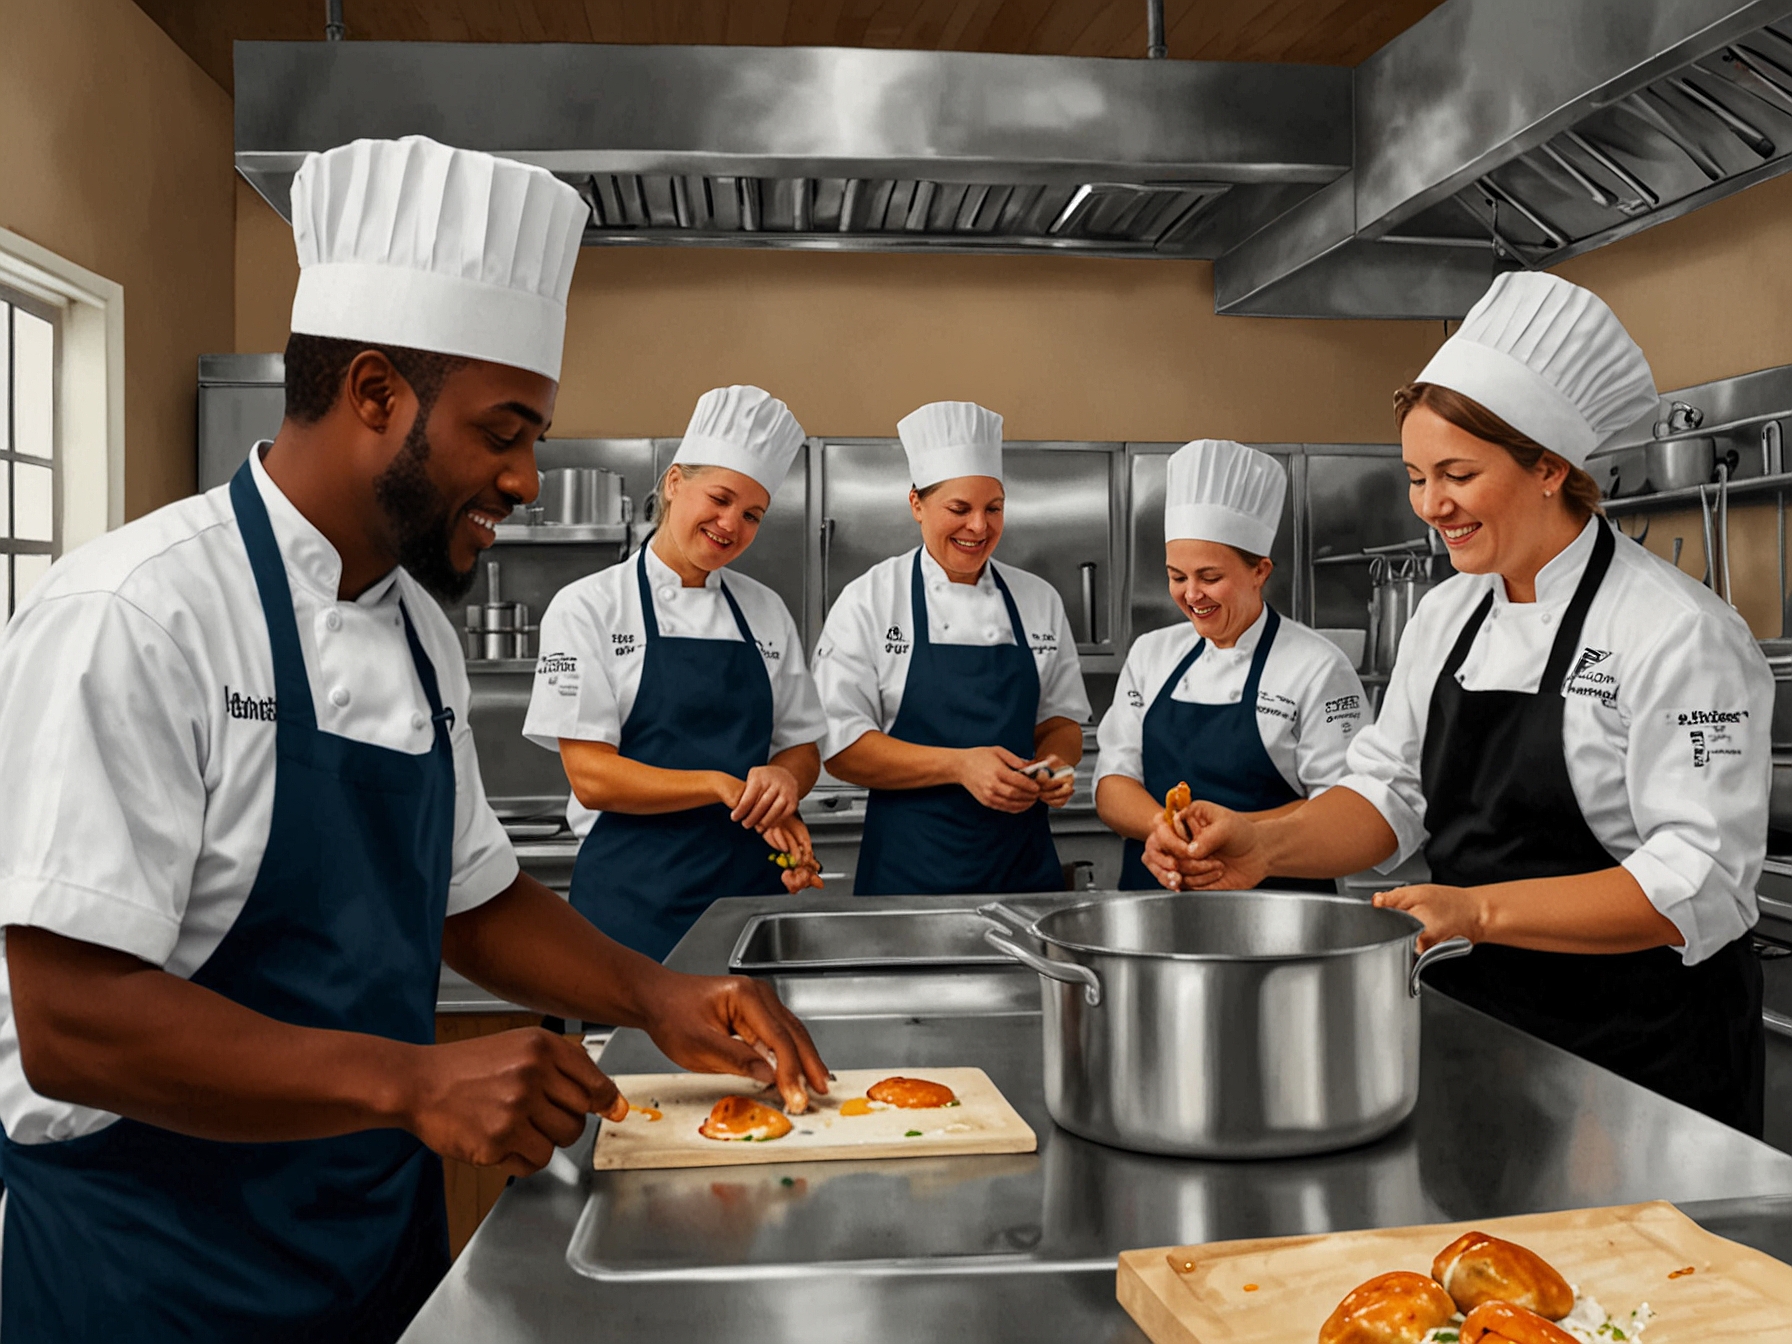 Local chefs mentoring program participants in a professional kitchen, offering hands-on culinary training and fostering a supportive community network.